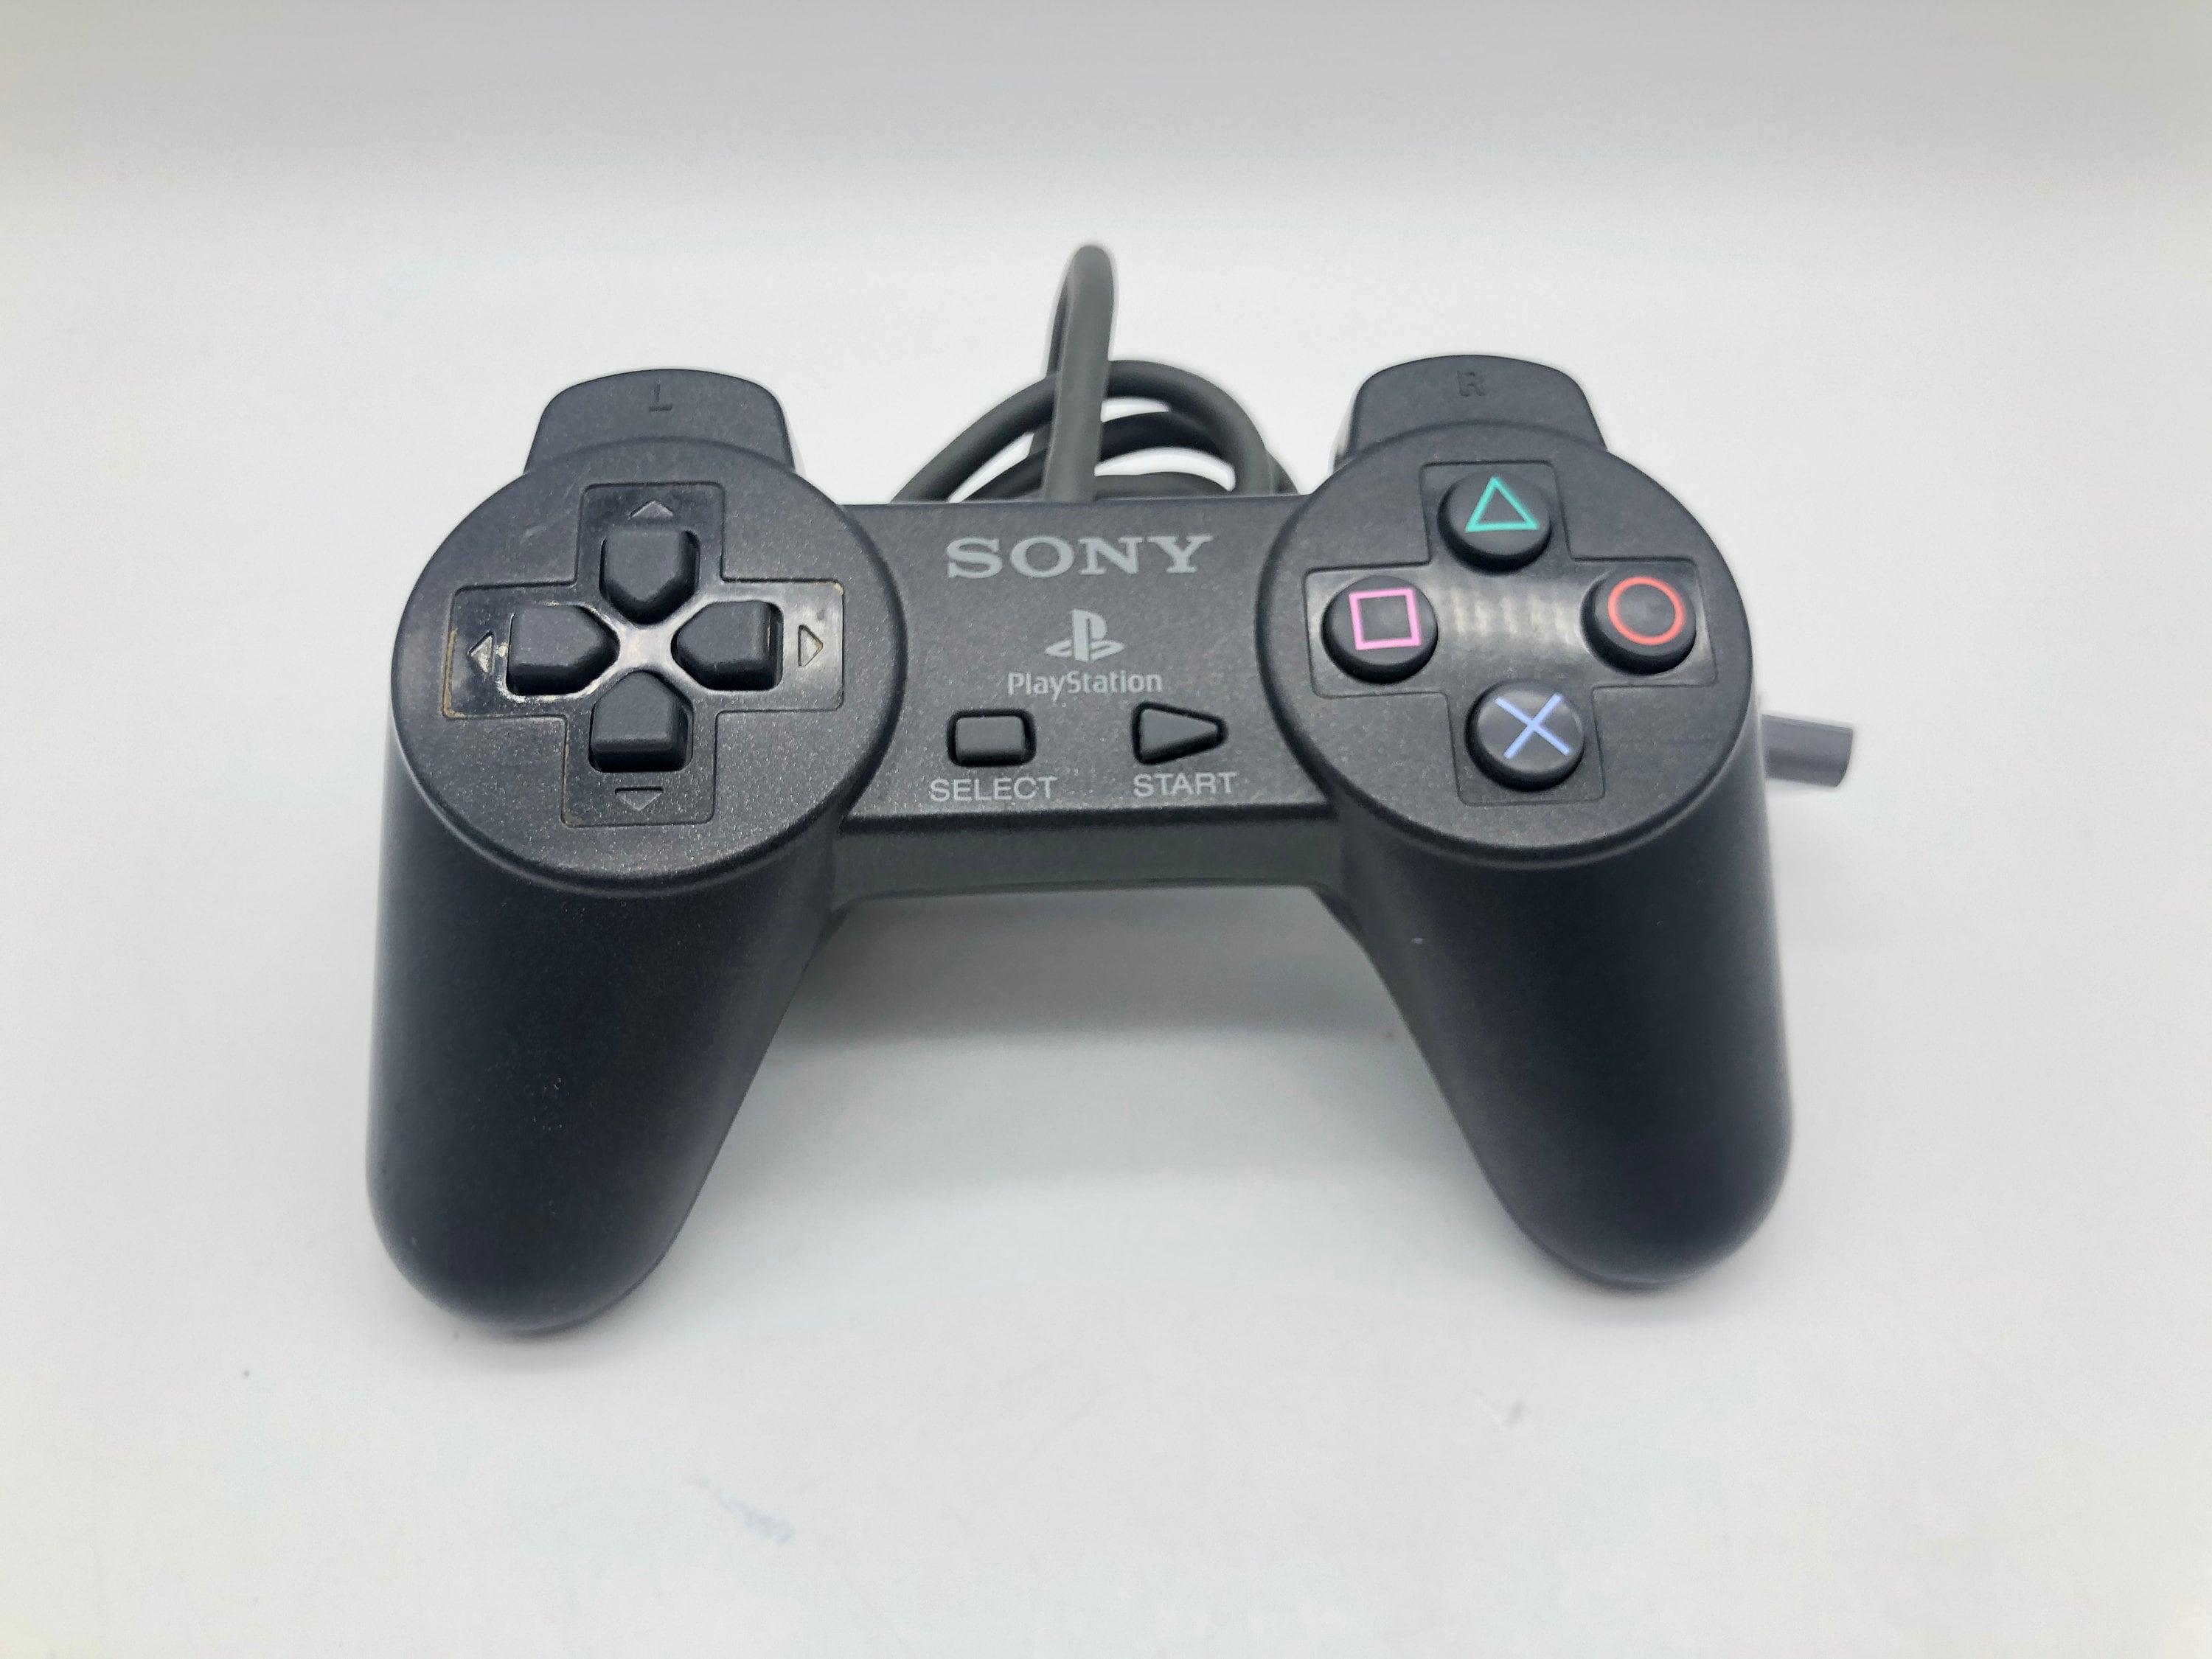 Playstation 1 Controller, Black, One, PS1, 1 Original Sony, SPCH-1080,  Tested, Free Shipping -  UK